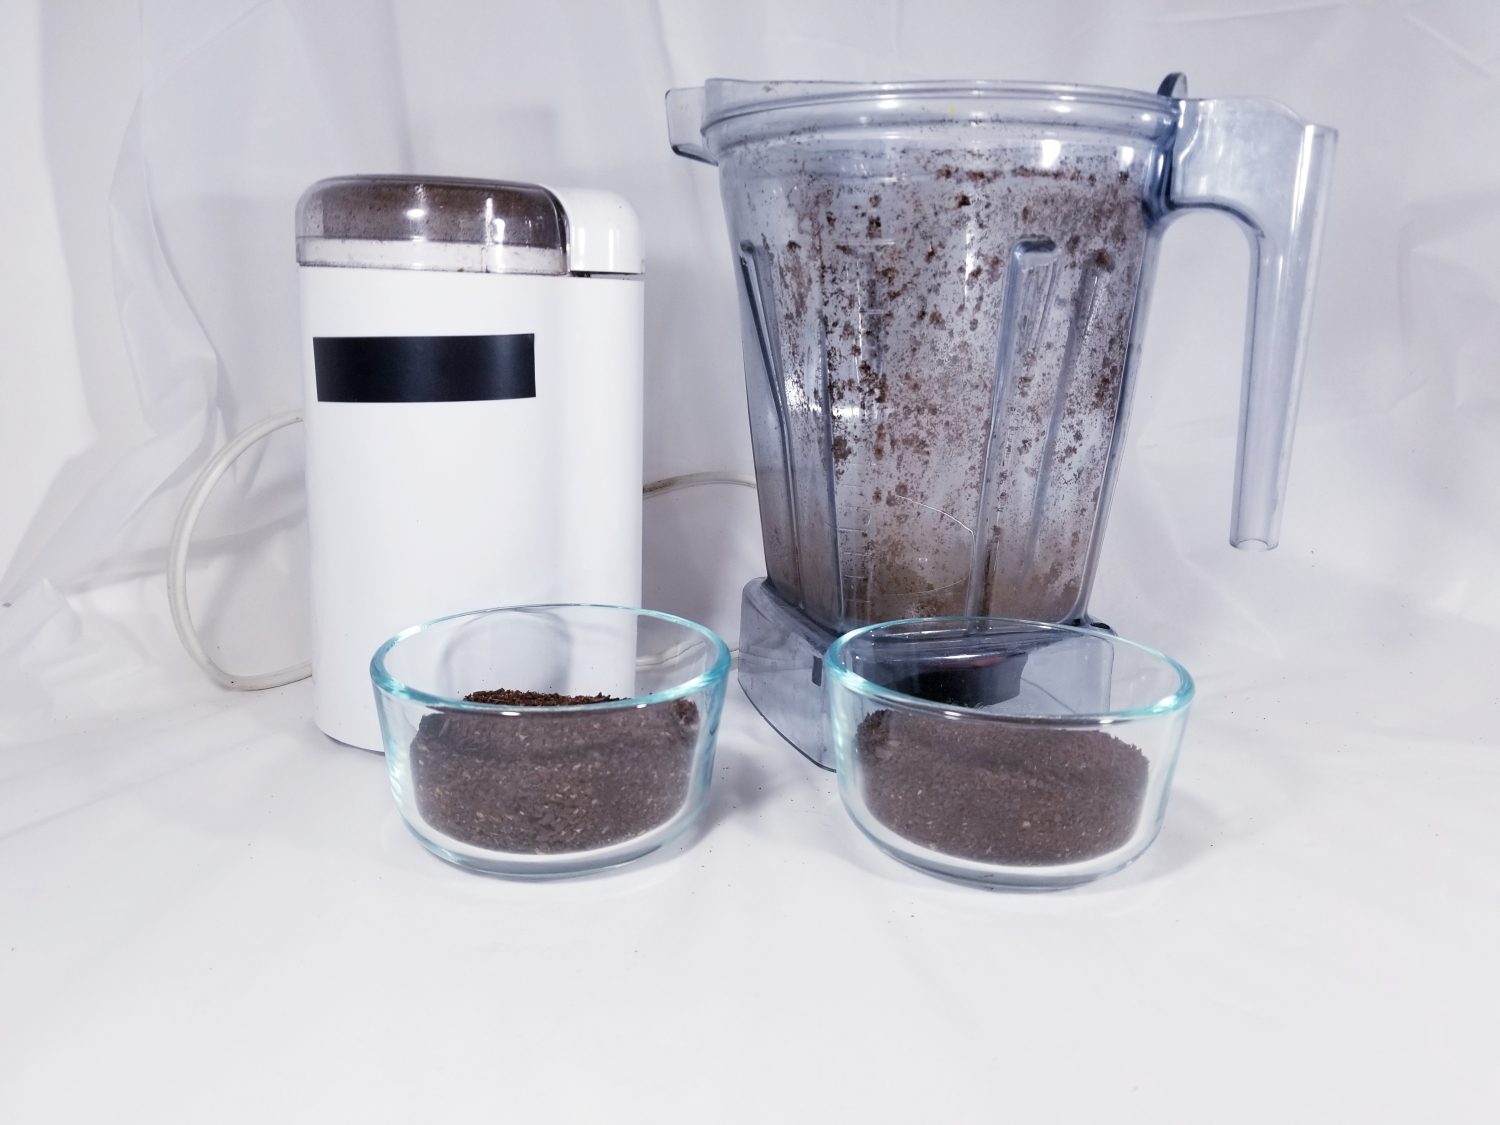 Photo of a coffee grinder, a blender container, and two containers of ground coffee